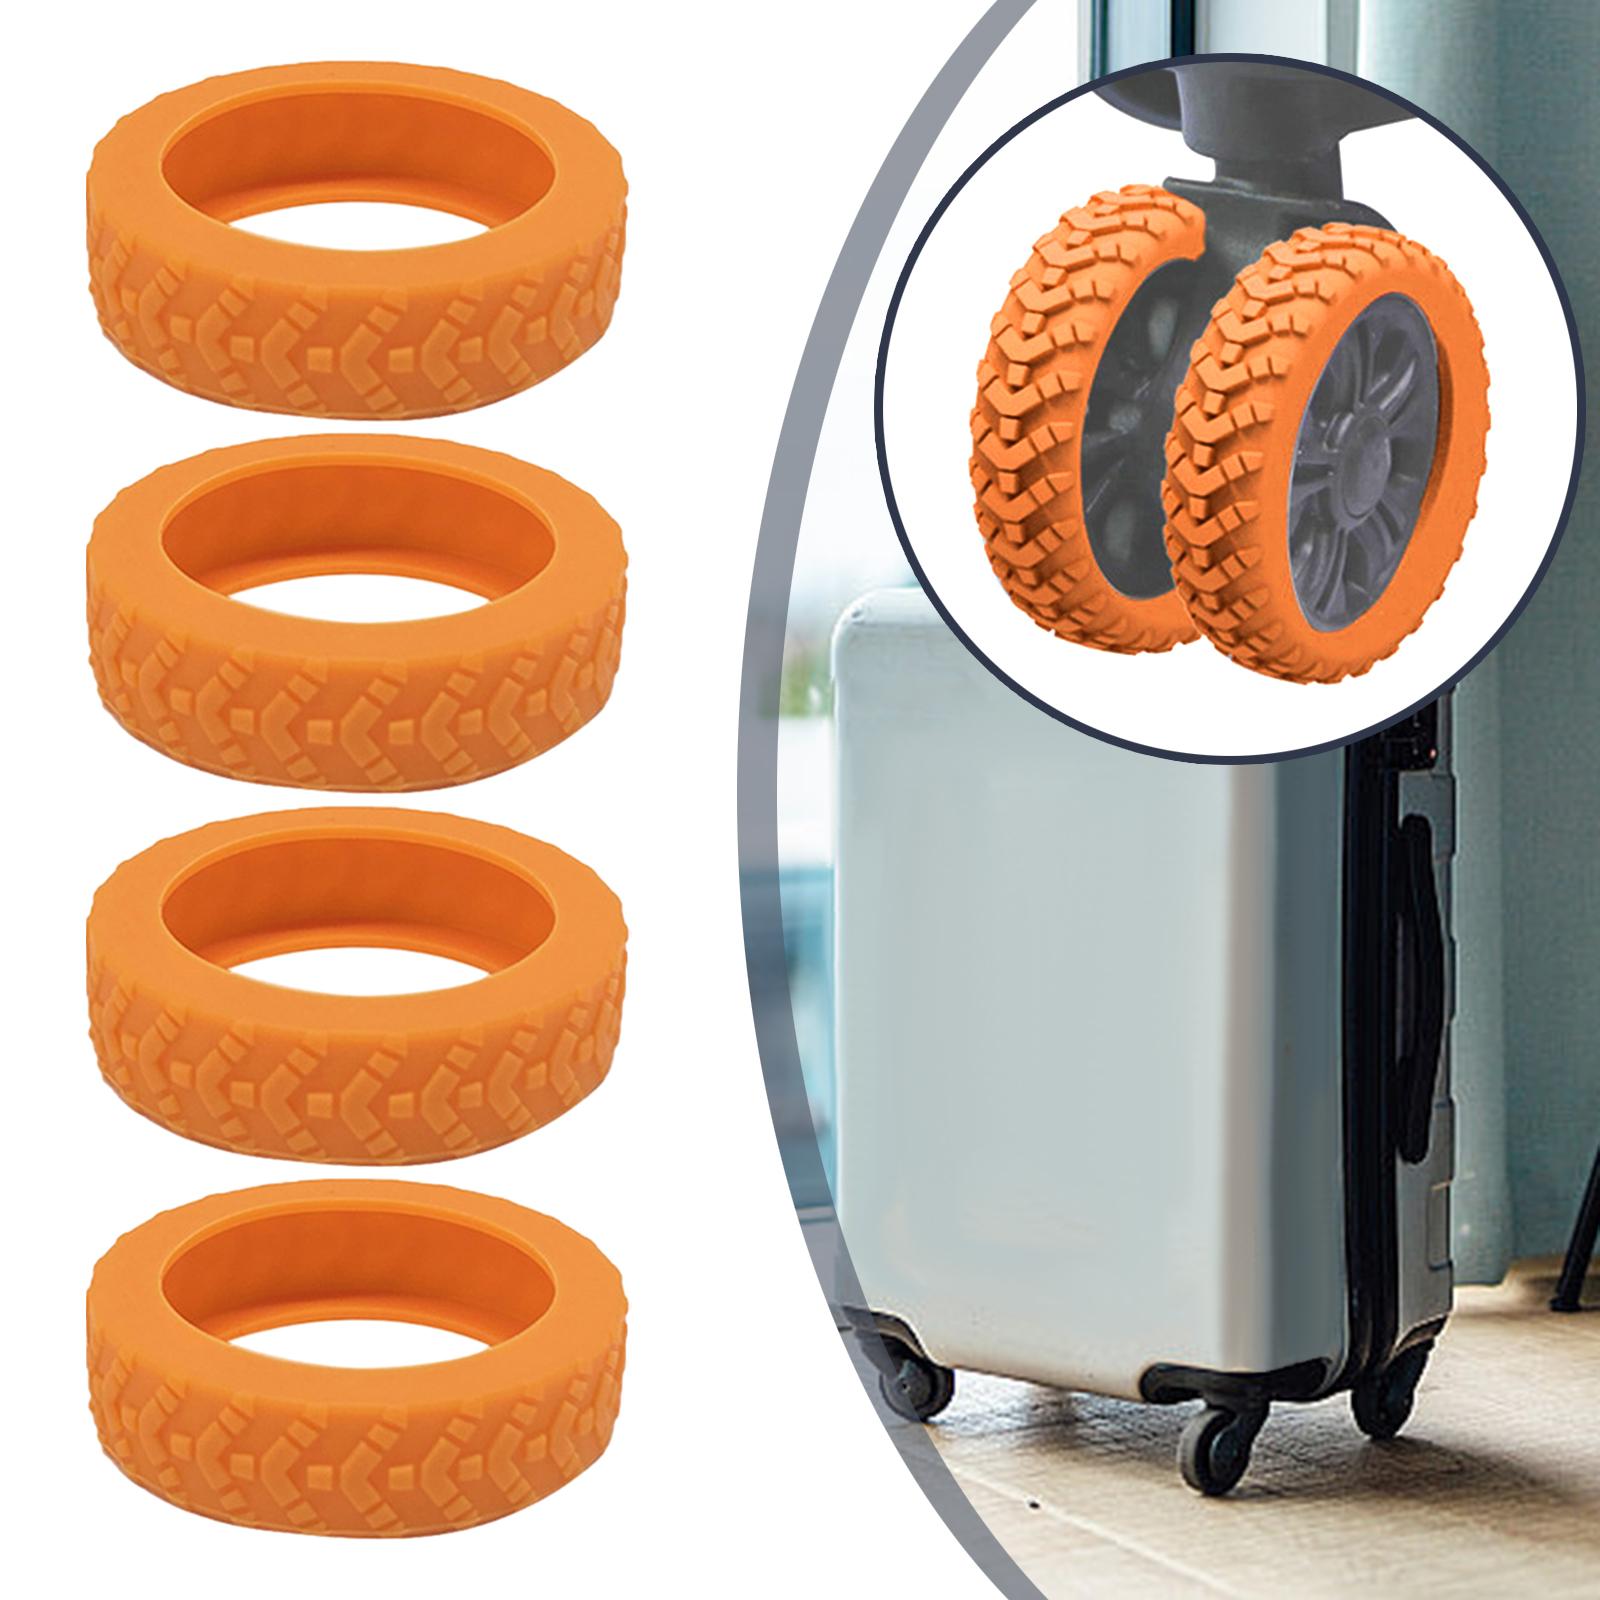 4 Pieces Luggage Wheels Covers Replace Parts Silicone Suitcase Wheels Covers Orange